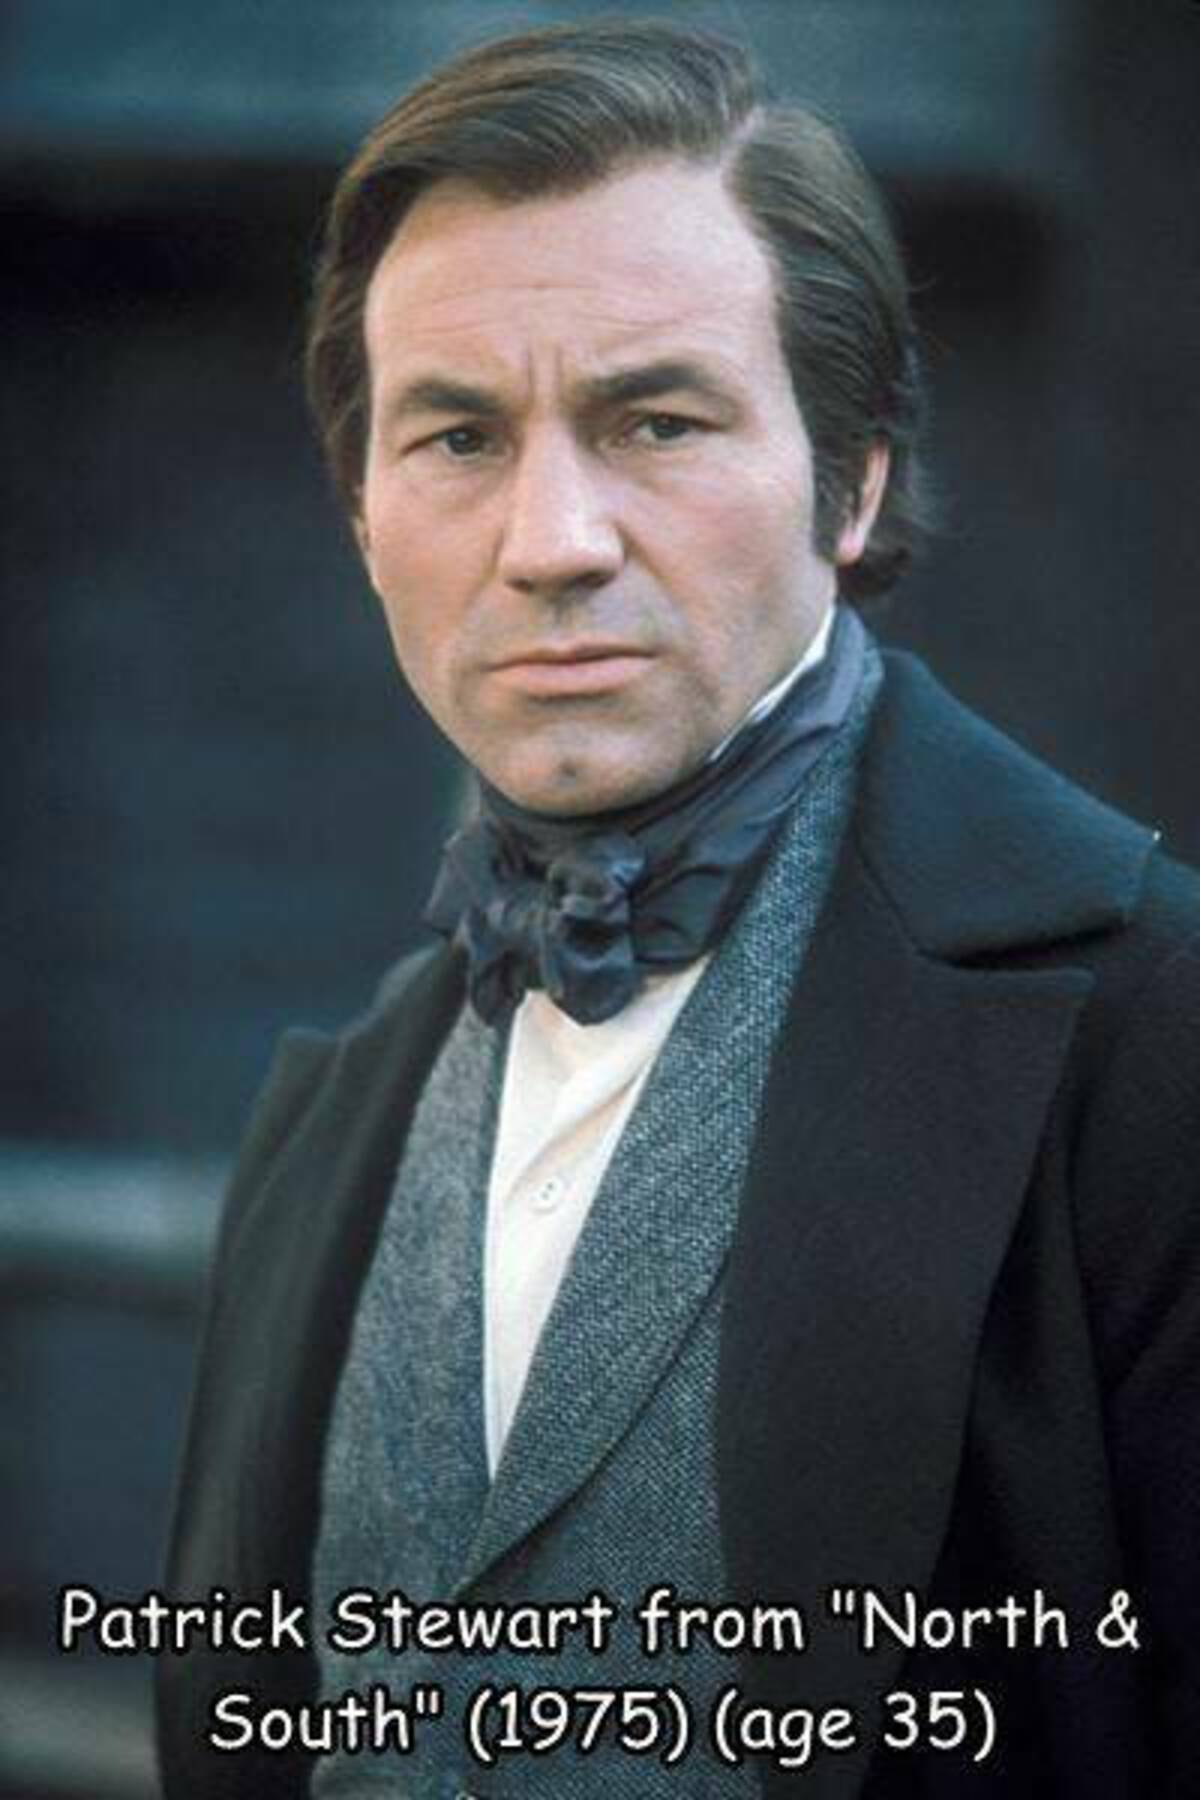 patrick stewart north and south - Patrick Stewart from "North & South" 1975 age 35